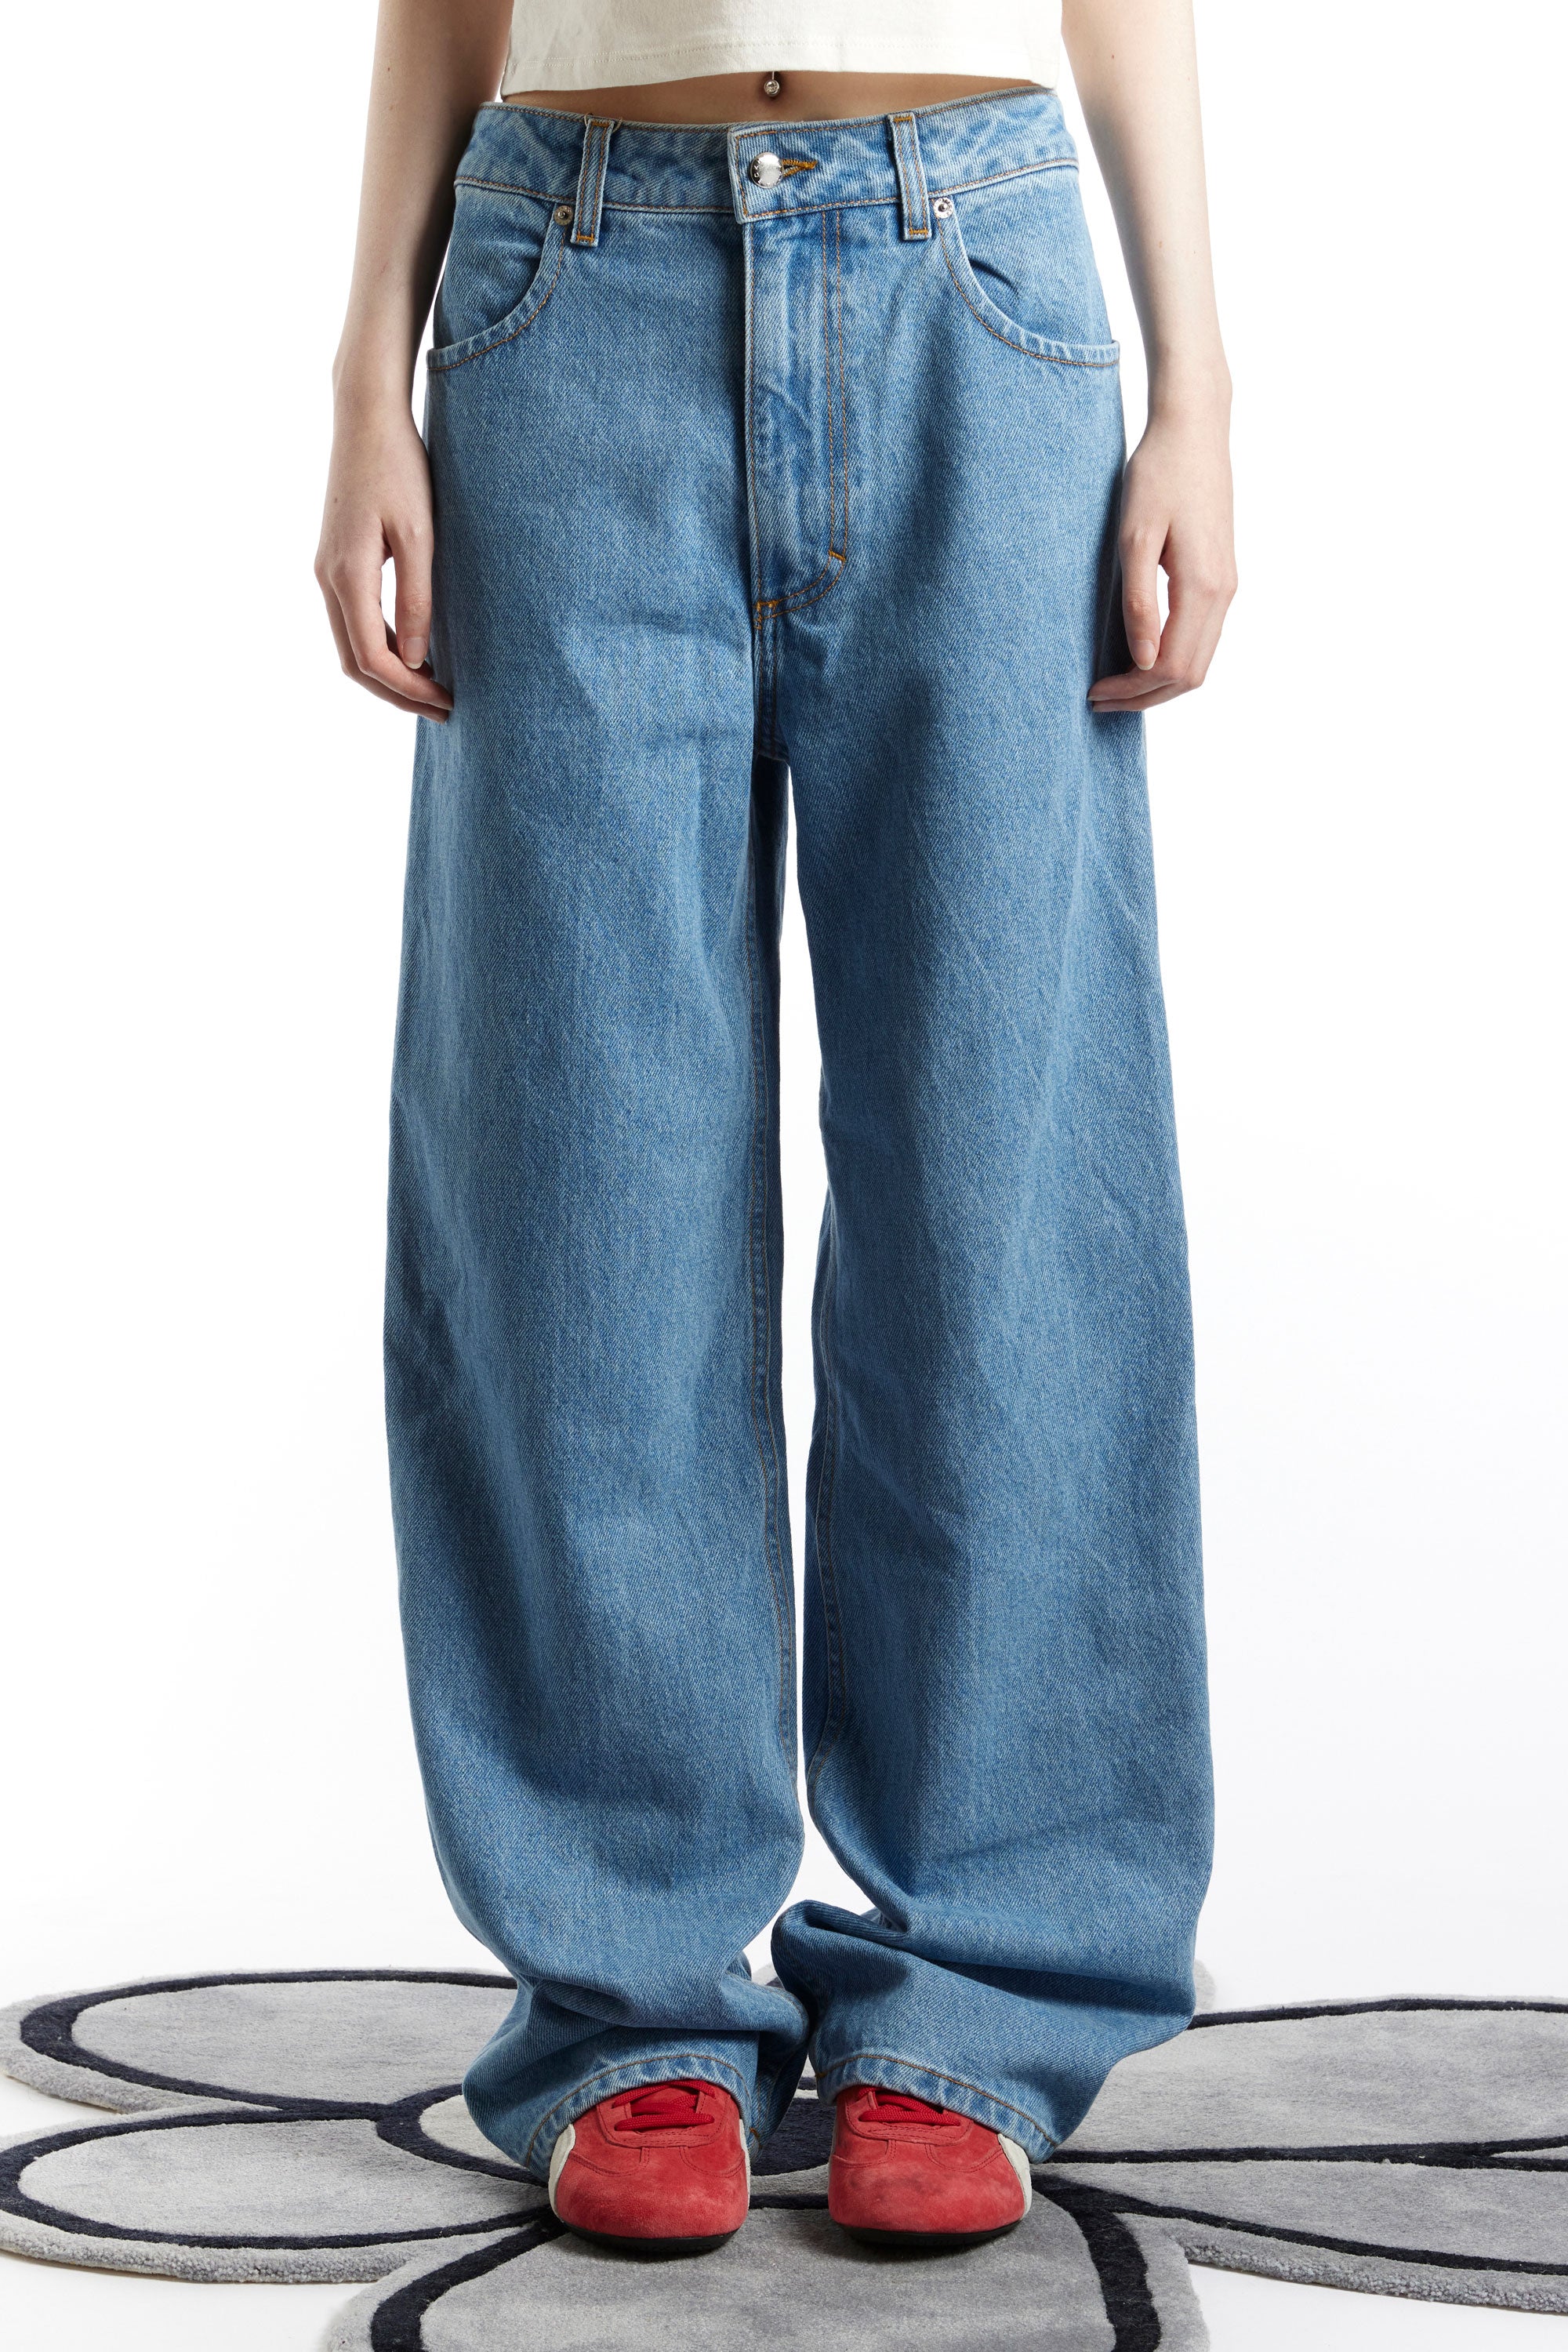 The ECKHAUS LATTA - WIDE LEG JEAN SS23 TRUE BLUE available online with global shipping, and in PAM Stores Melbourne and Sydney.